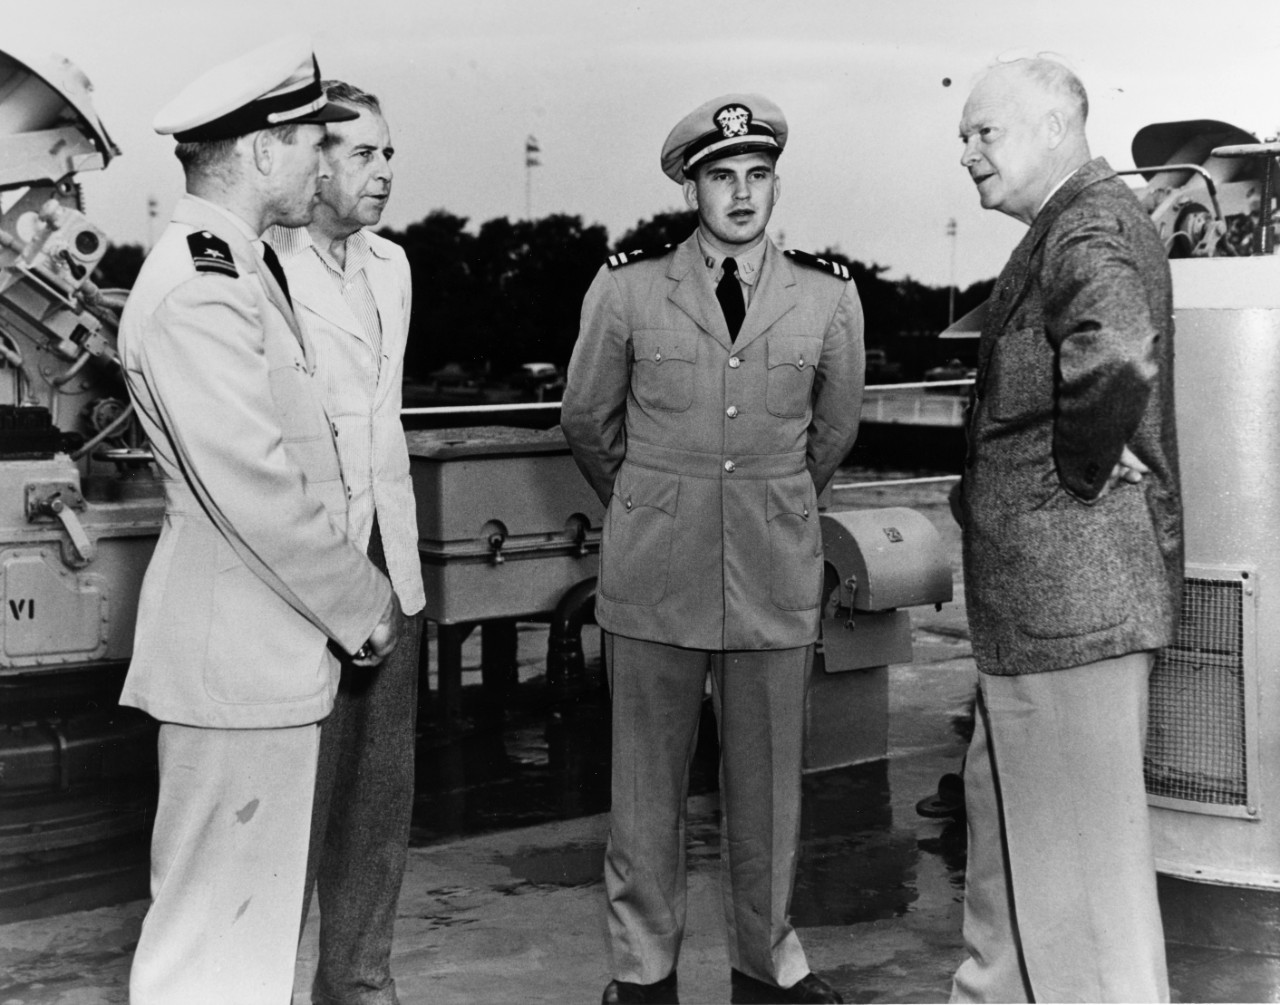 President Dwight D. Eisenhower make a quick inspection on board LSMR-515 after his golf game and before returning to USS Williamsburg, which is tied up at the Santee Dock at the US Naval Academy. Left to right: unidentified ship's officer, Vice Admiral C. Turner Joy, Superintendent of the Naval Academy, Lieutenant C.B. Hood, President Eisenhower